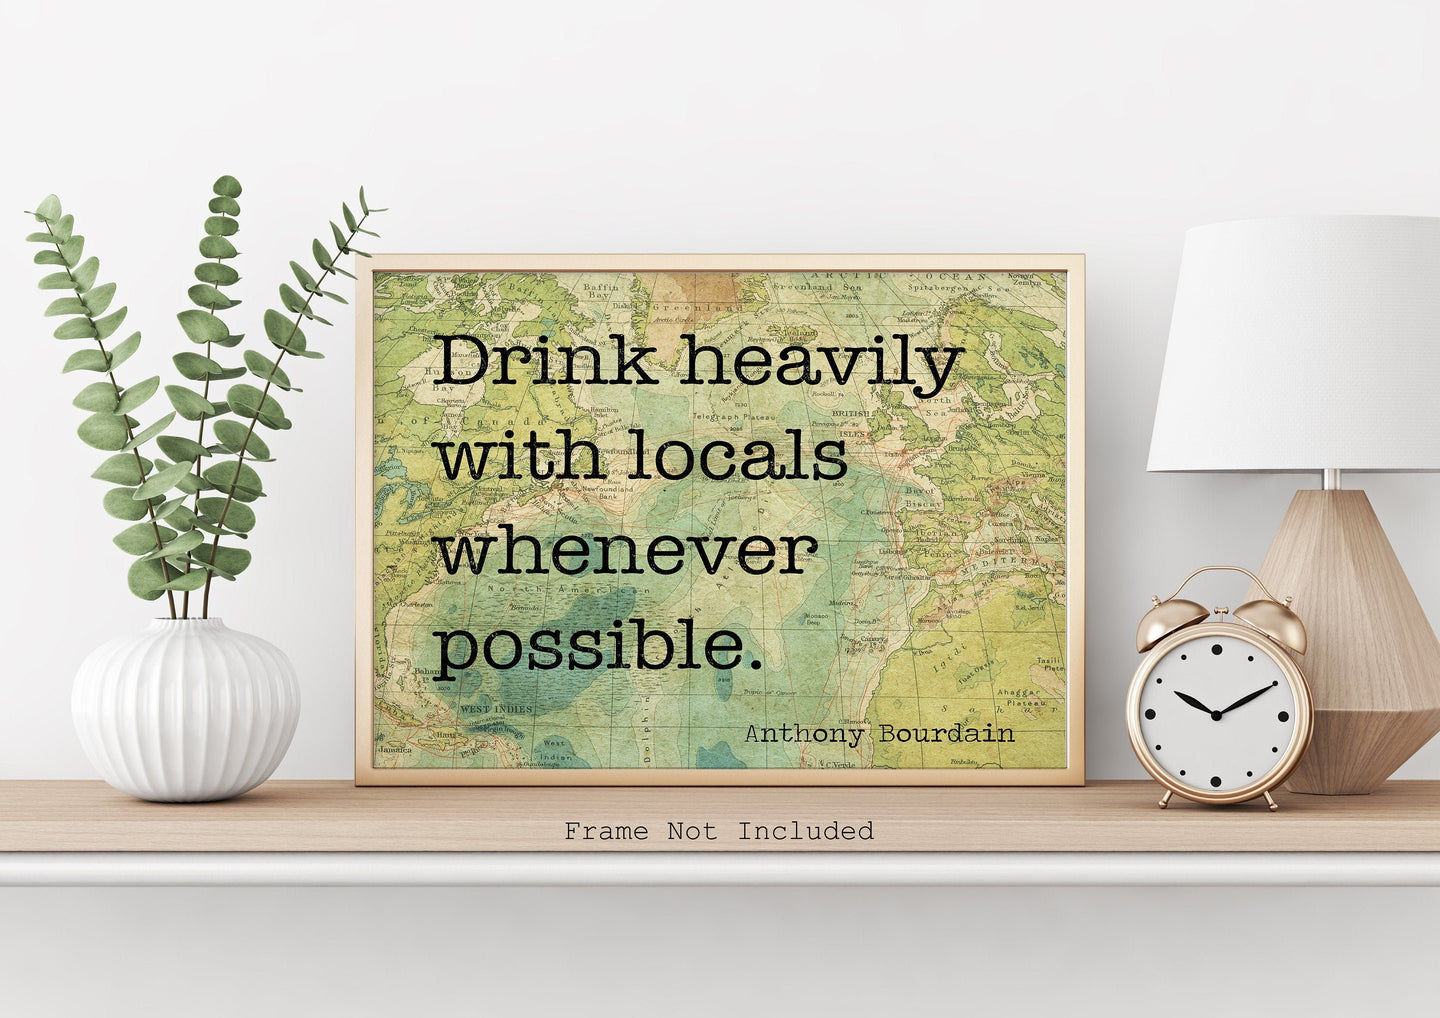 Anthony Bourdain Print - Drink heavily with locals whenever possible - UNFRAMED inspirational print for Home, Inspirational bourdain quote